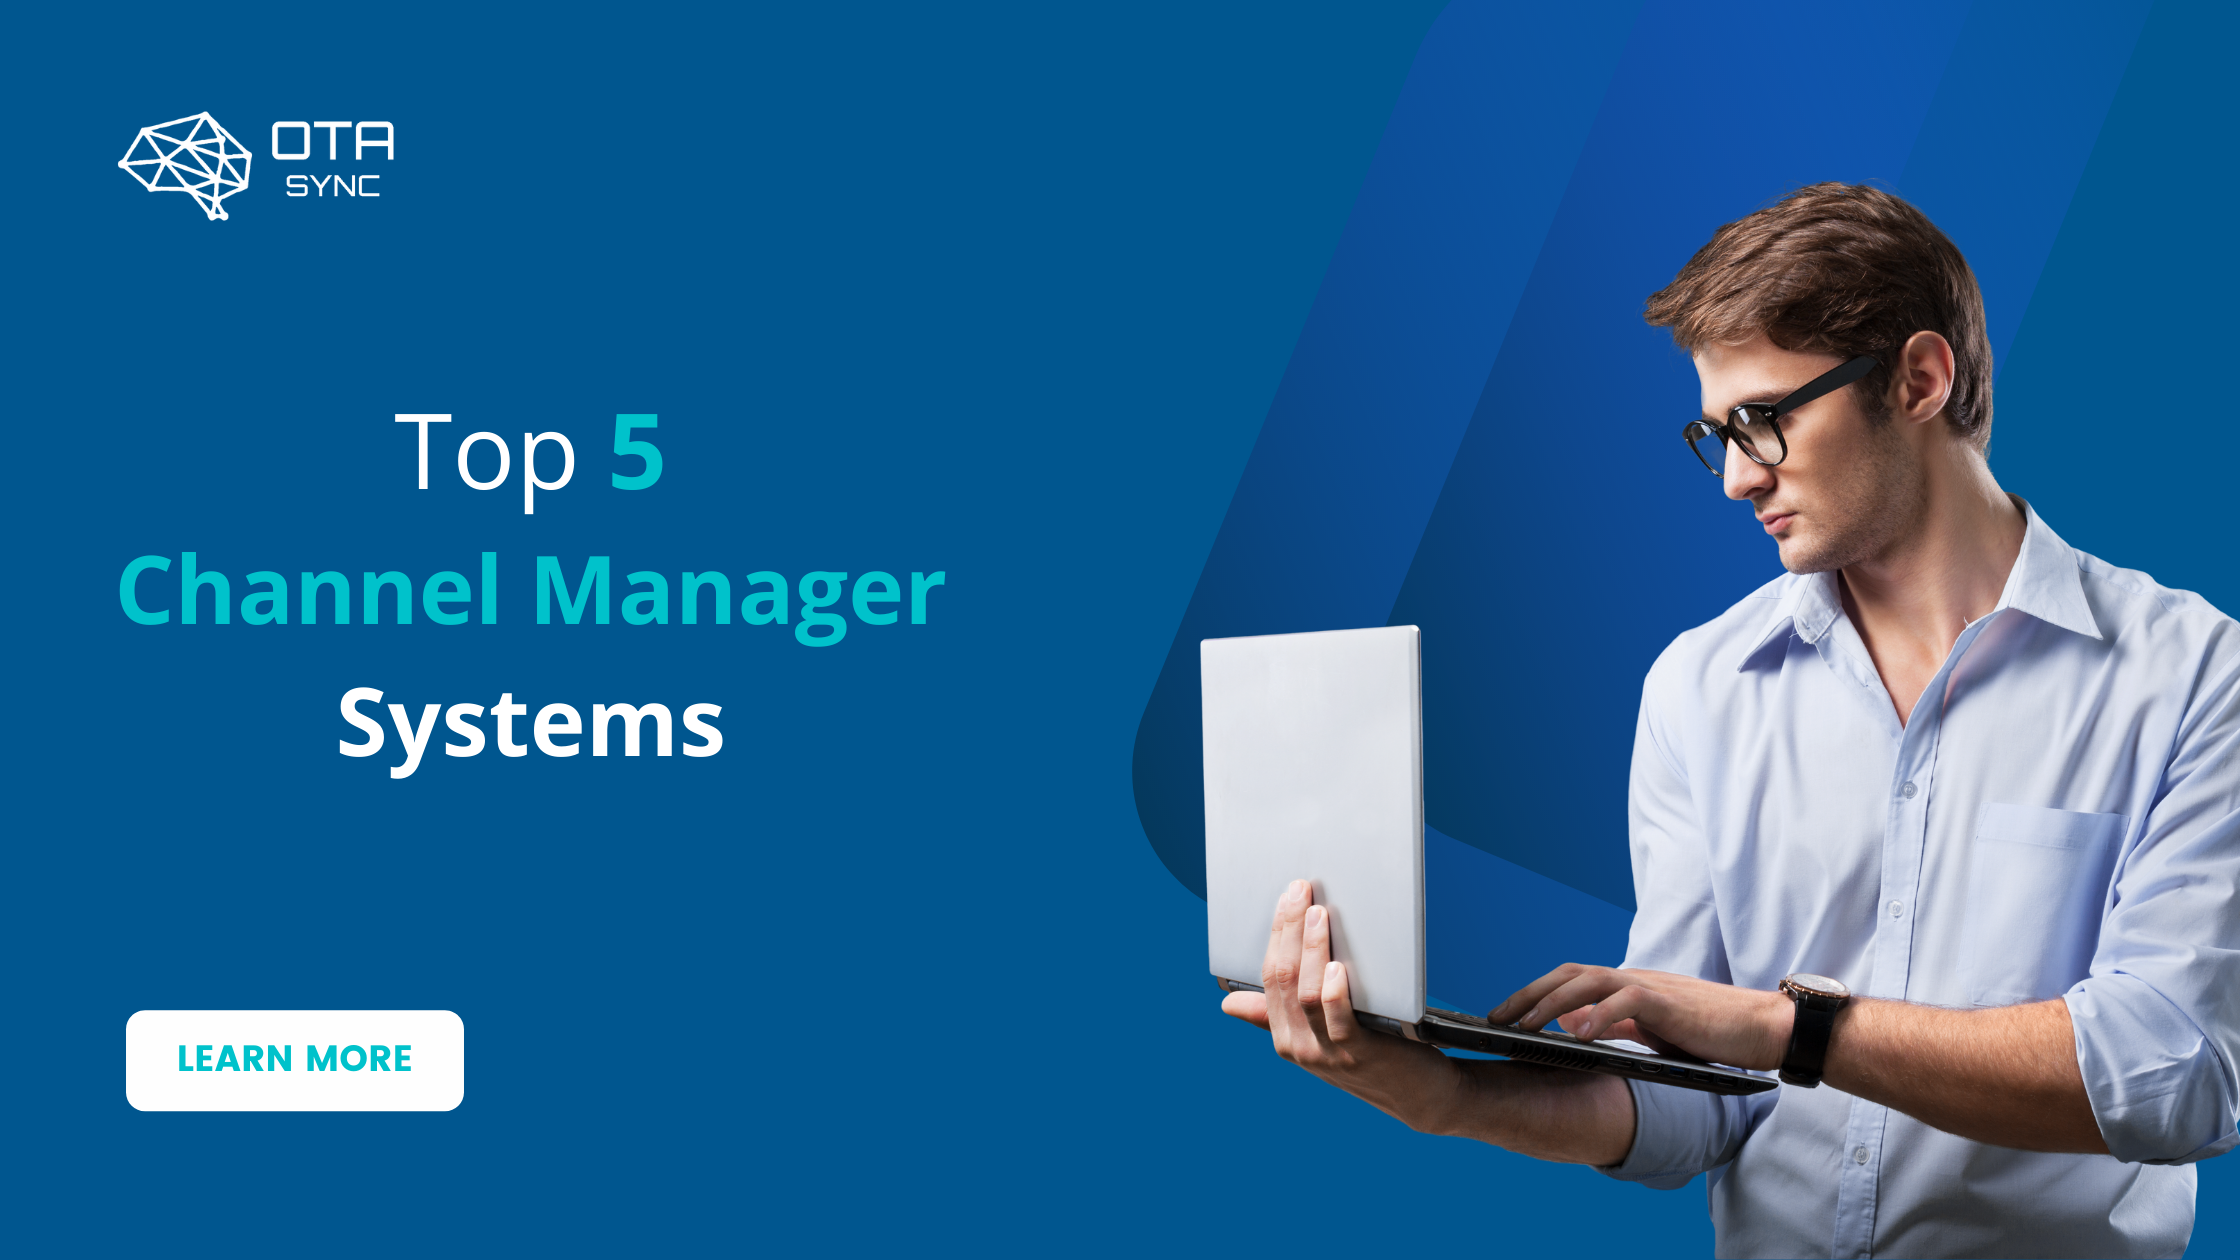 Top 5 Channel Manager Systems